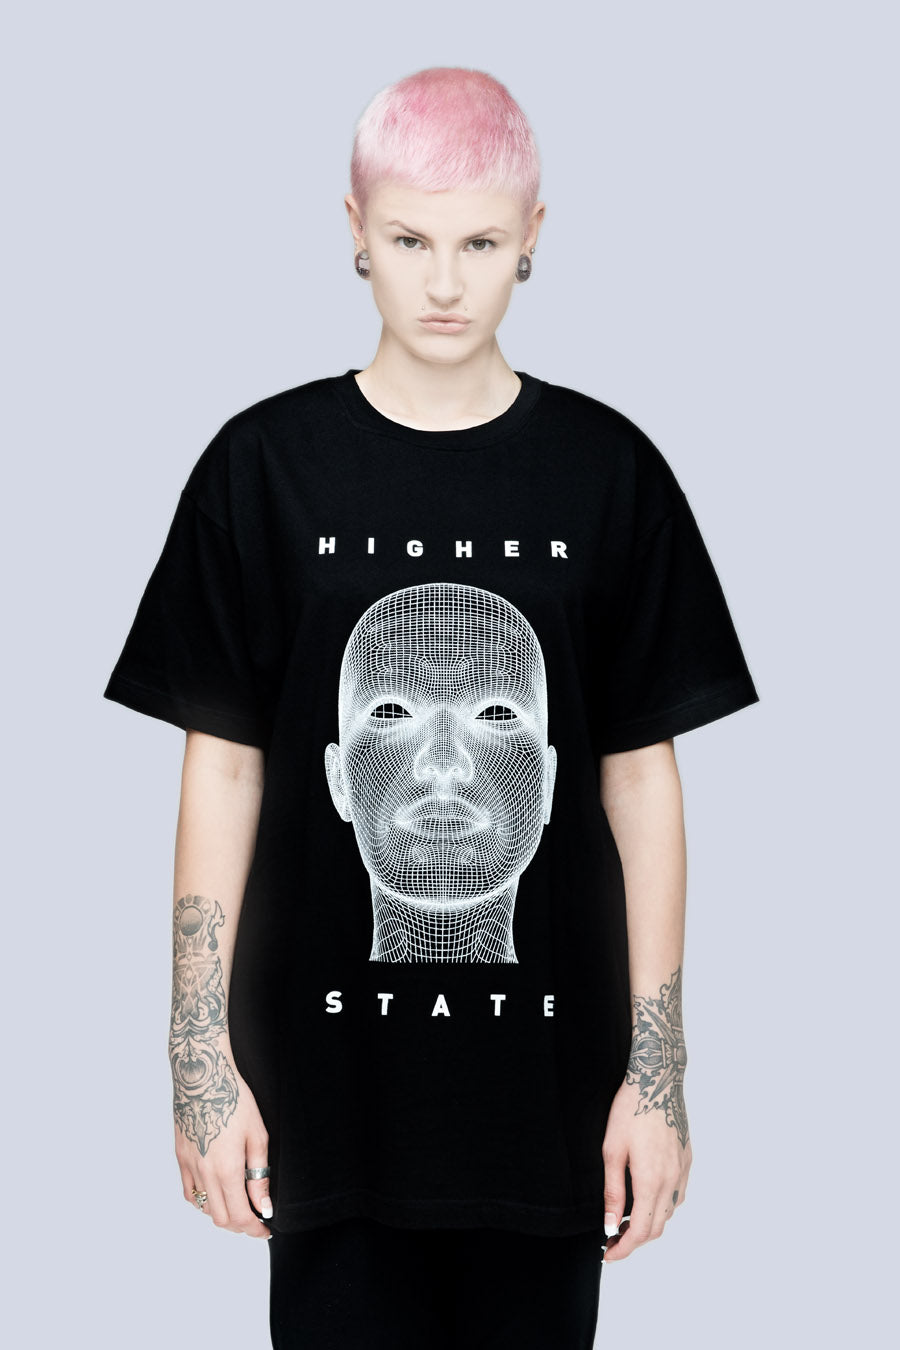 Long x Pussykrew Higher State T Shirt